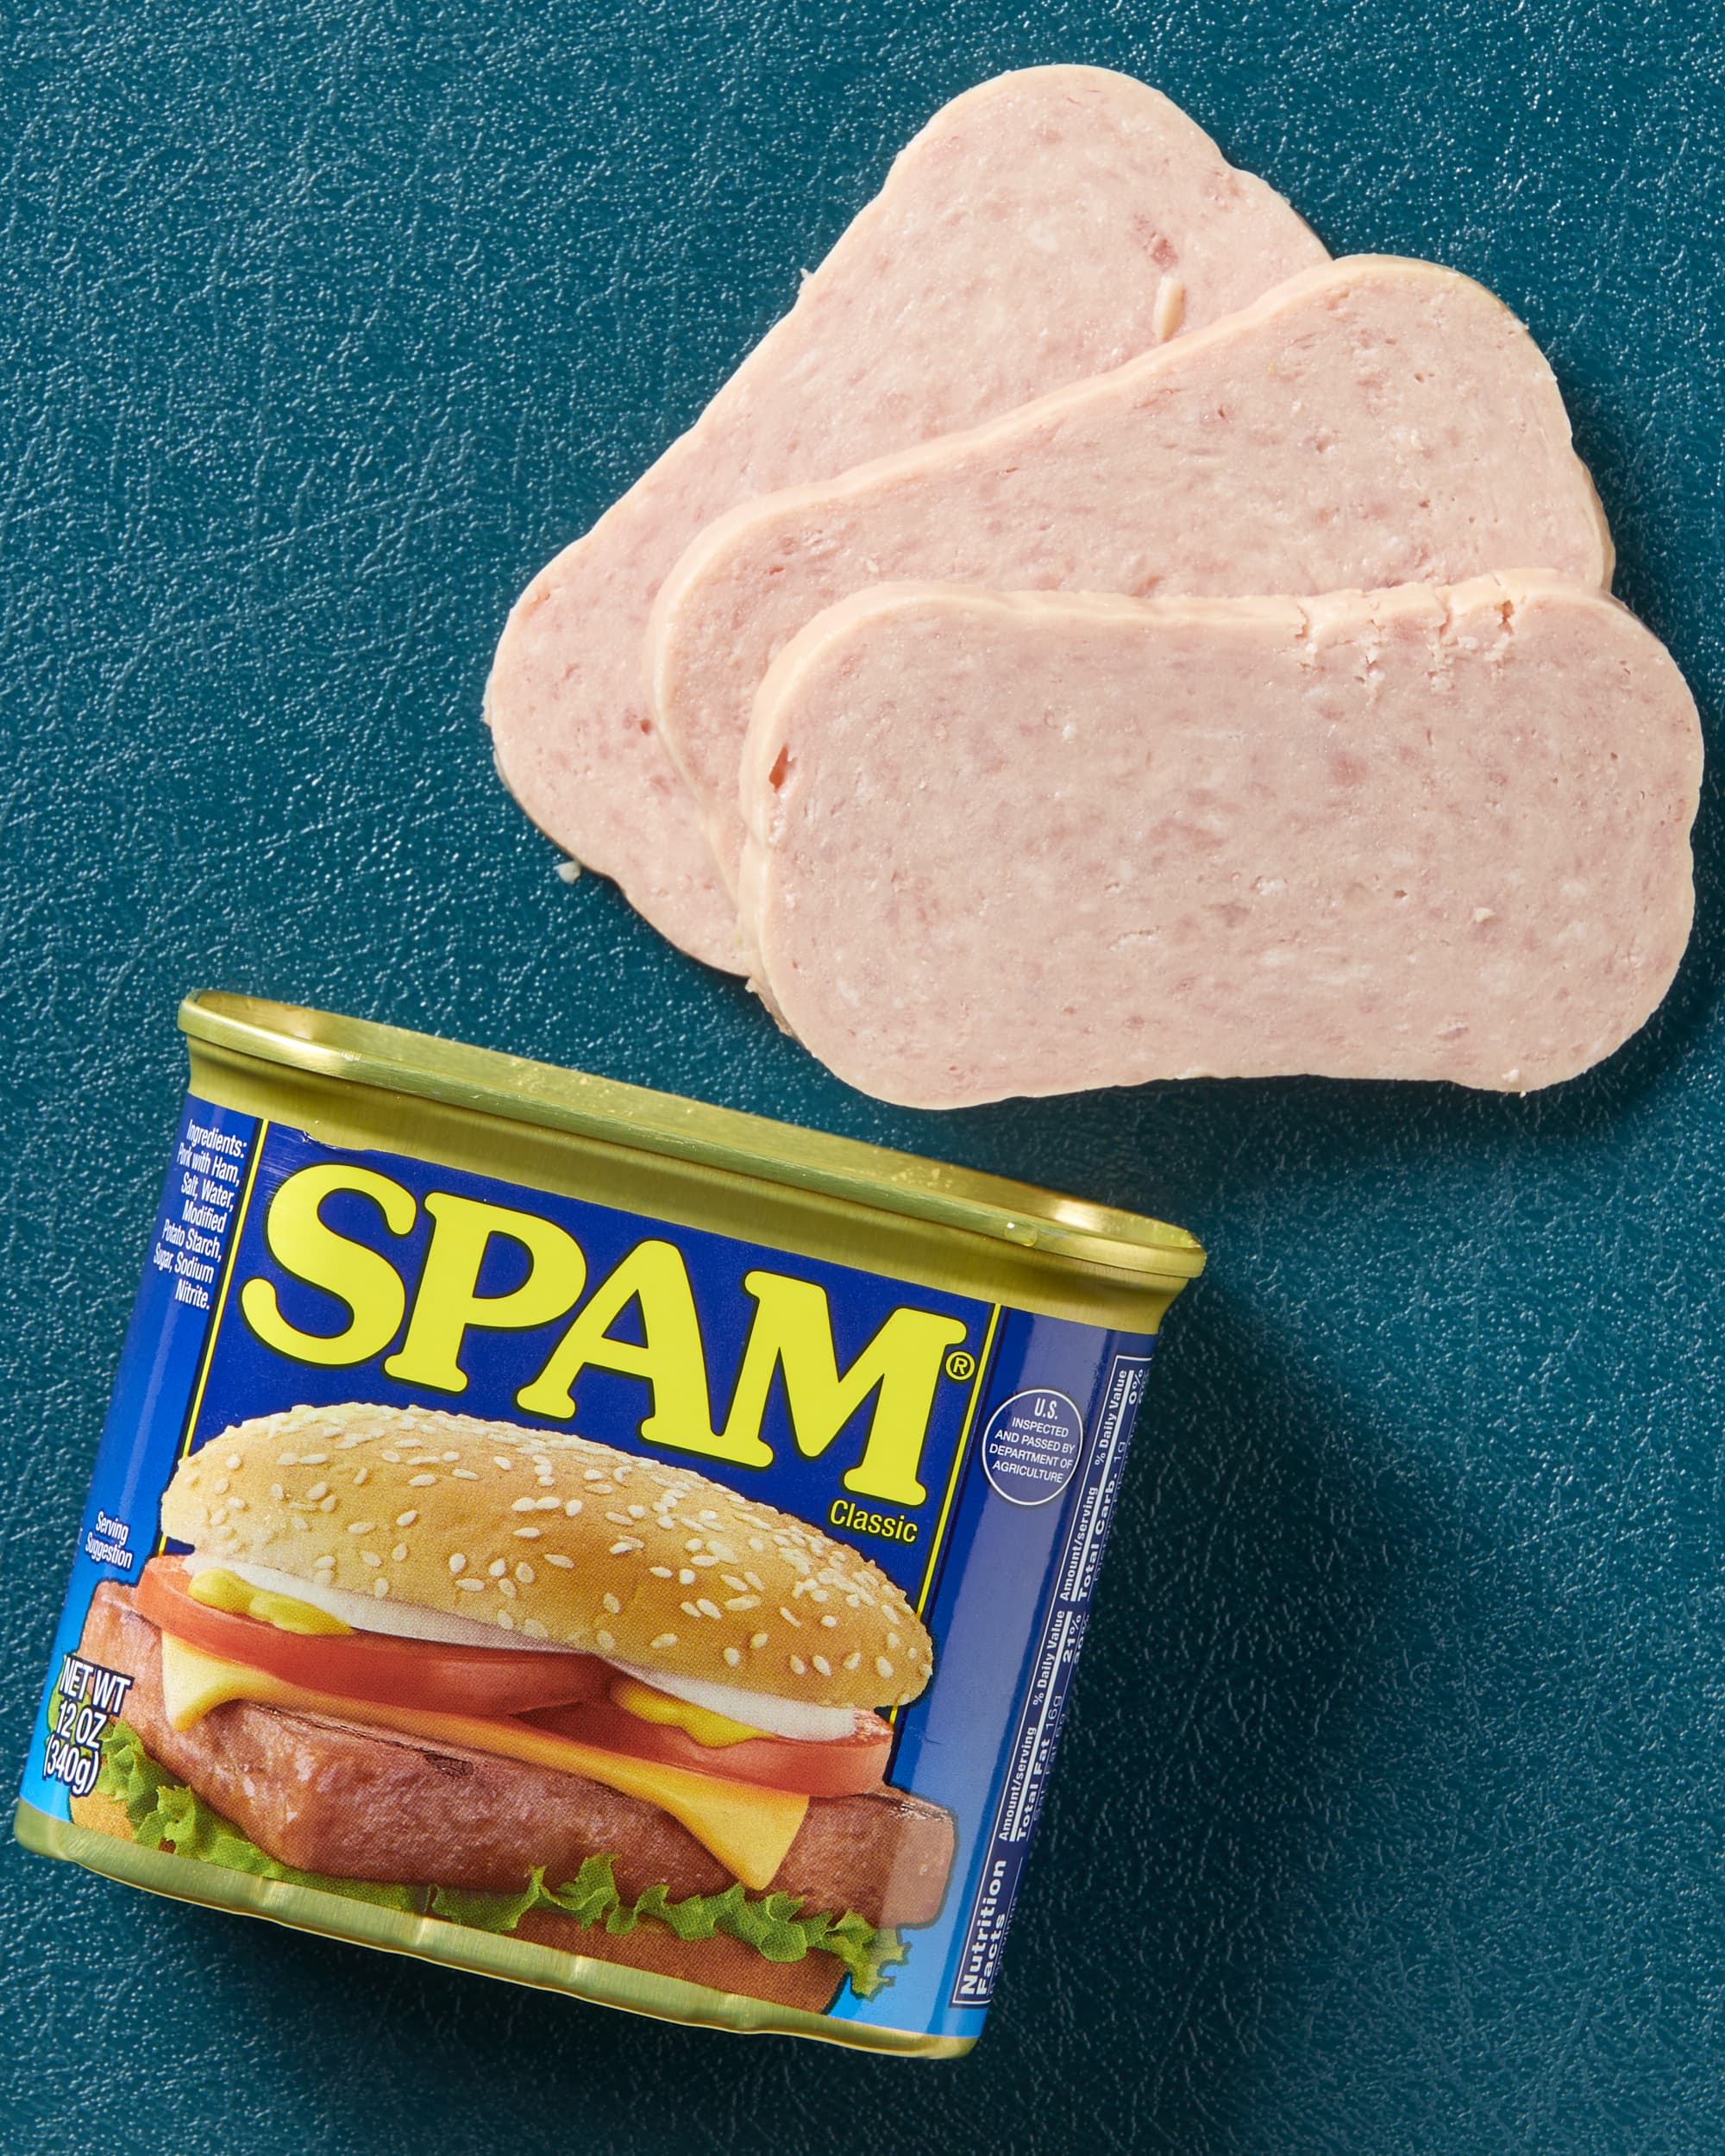 What Is SPAM and What Is It Made Of?